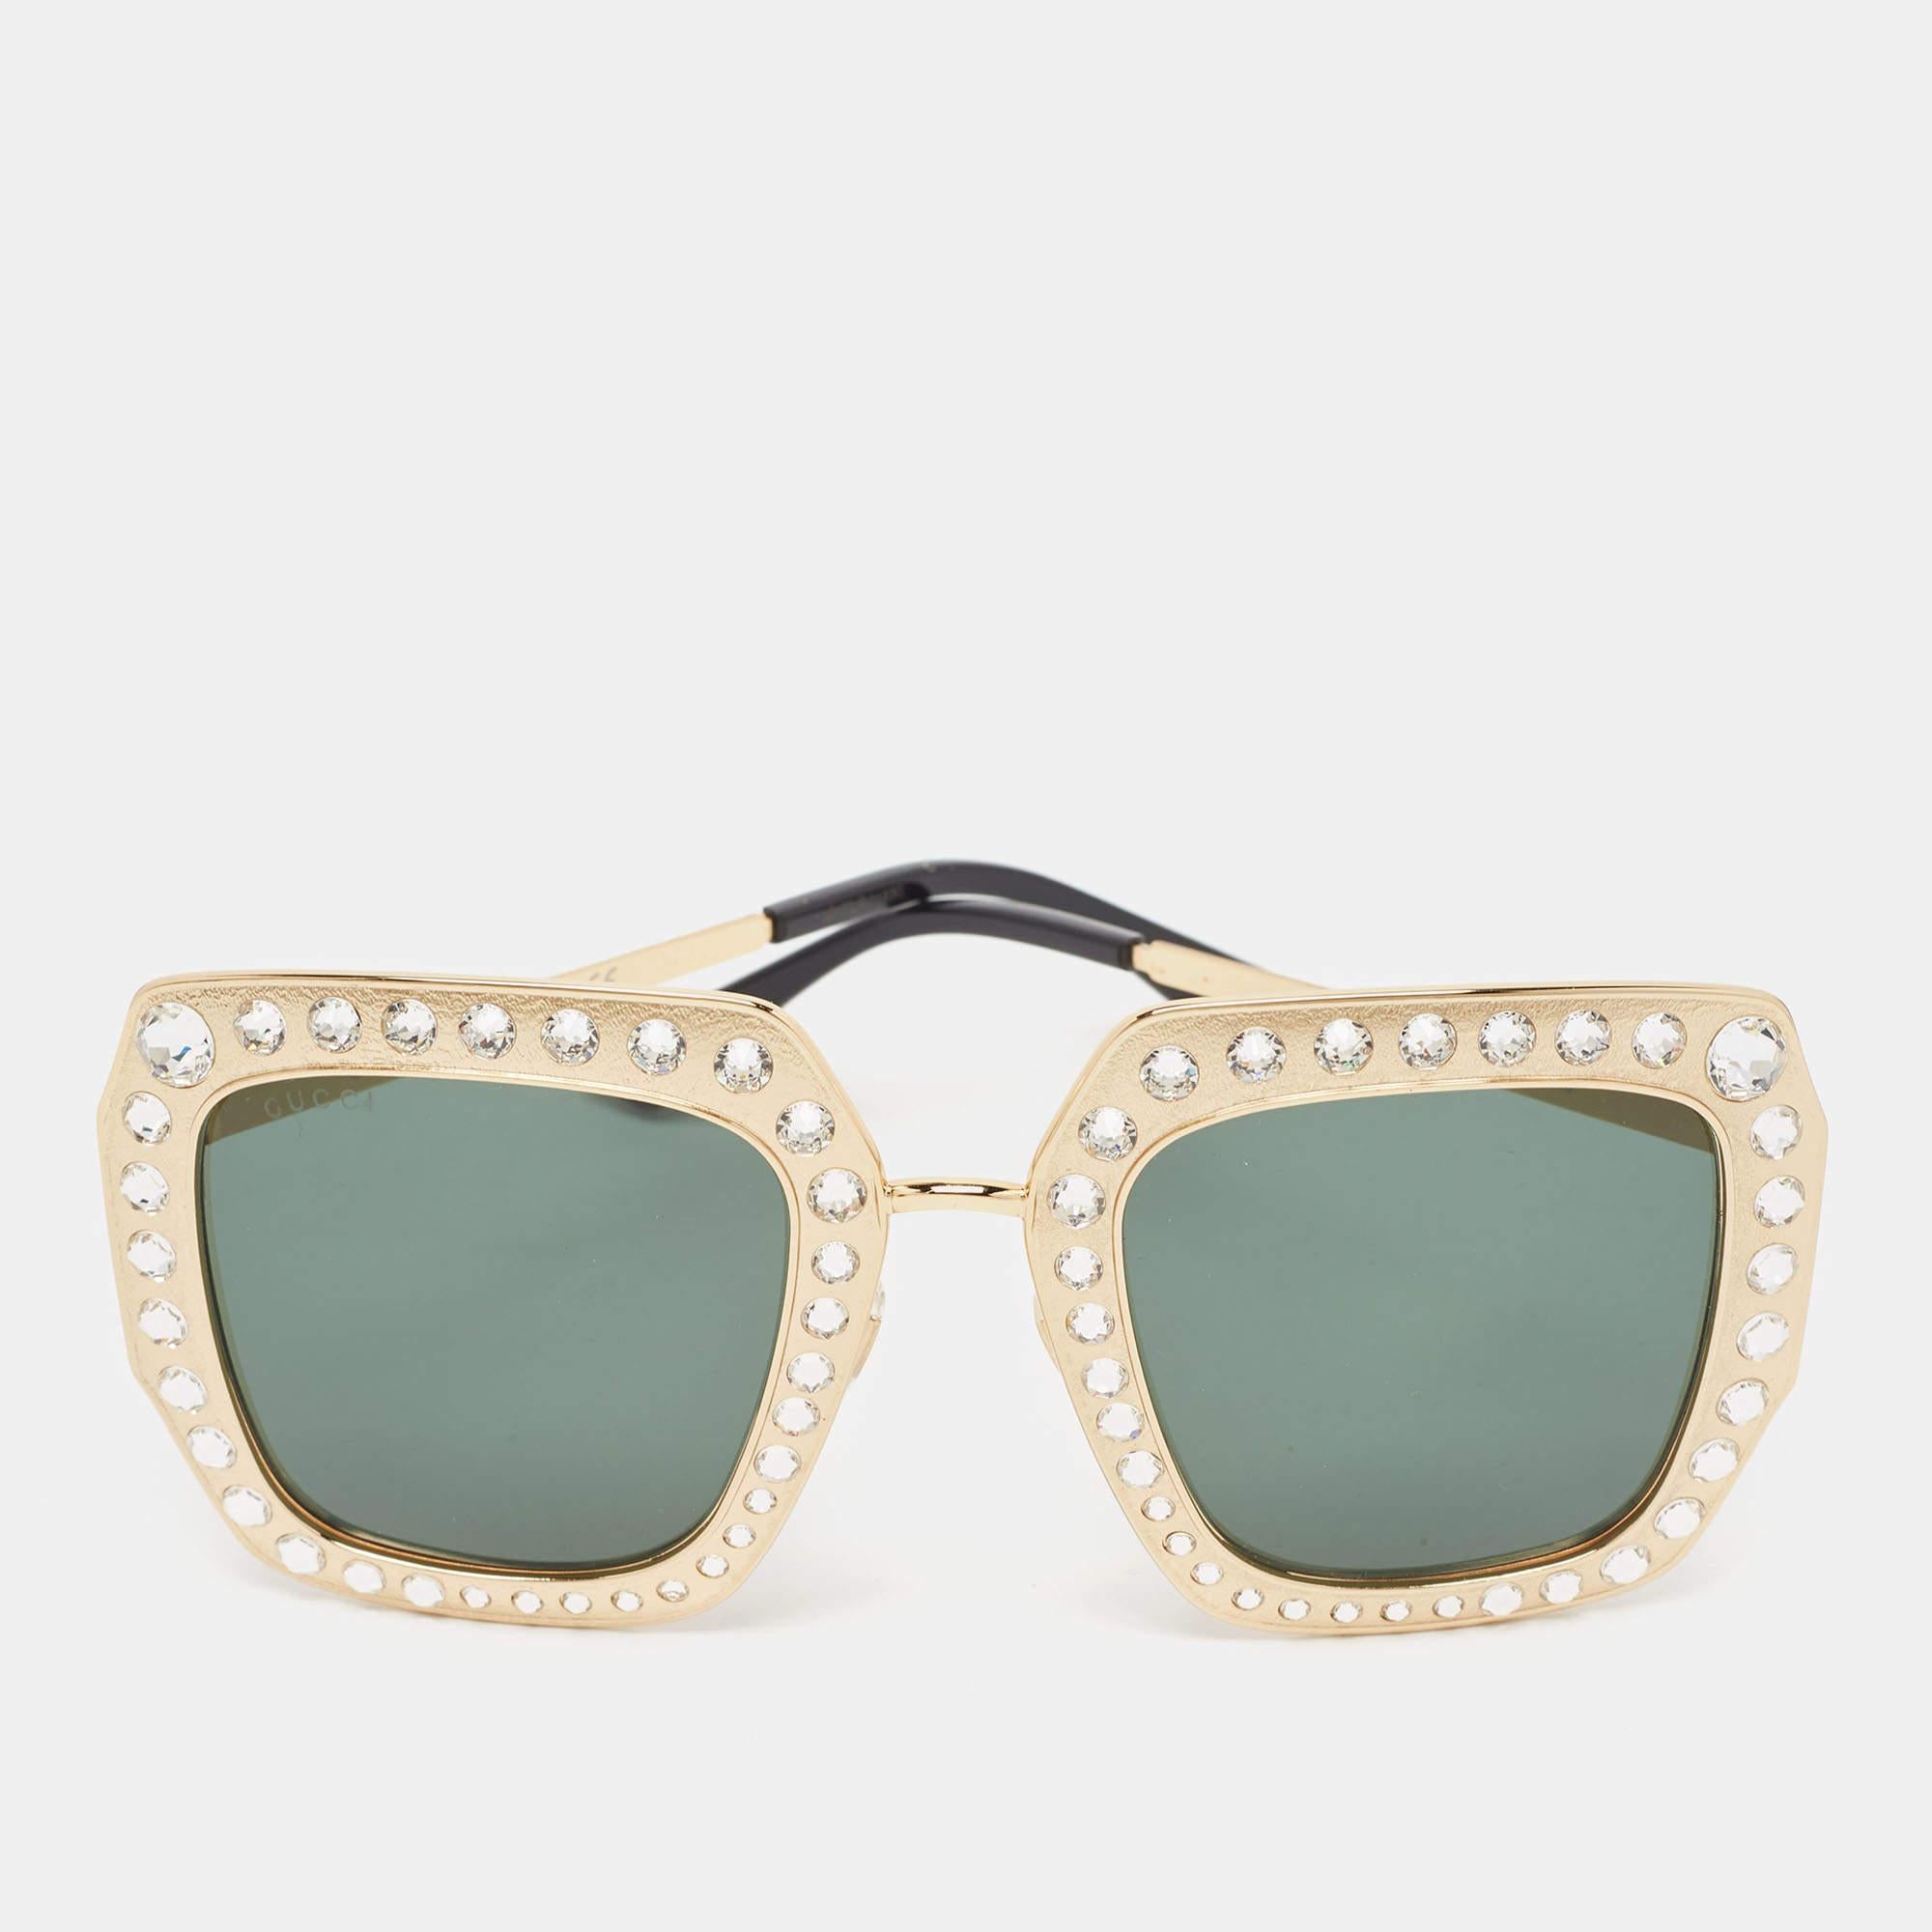 This pair of Gucci sunglasses is an ideal pick for a day out in the sun or indoor photoshoots. It's a statement accessory. The gold-tone frame is fitted with crystals on the front.

Includes: Original Case, Original Dust Cloth, Original Pouch